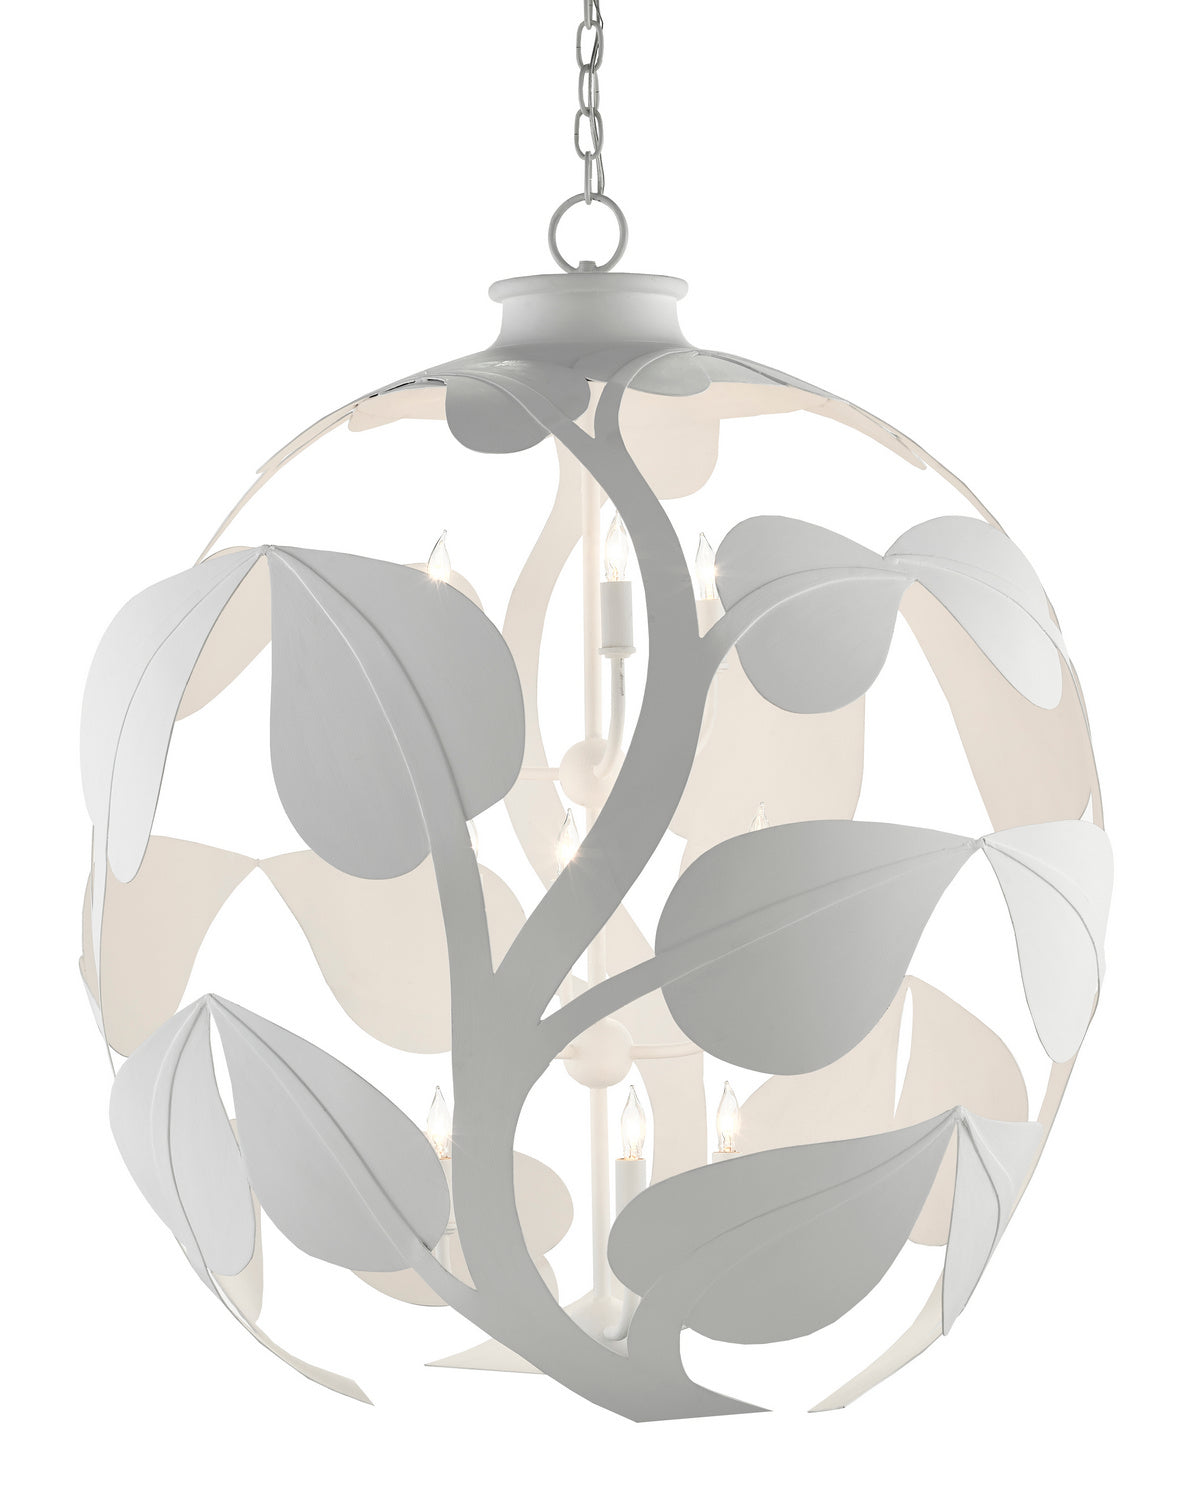 Nine Light Chandelier from the Plumeria collection in Gesso White finish